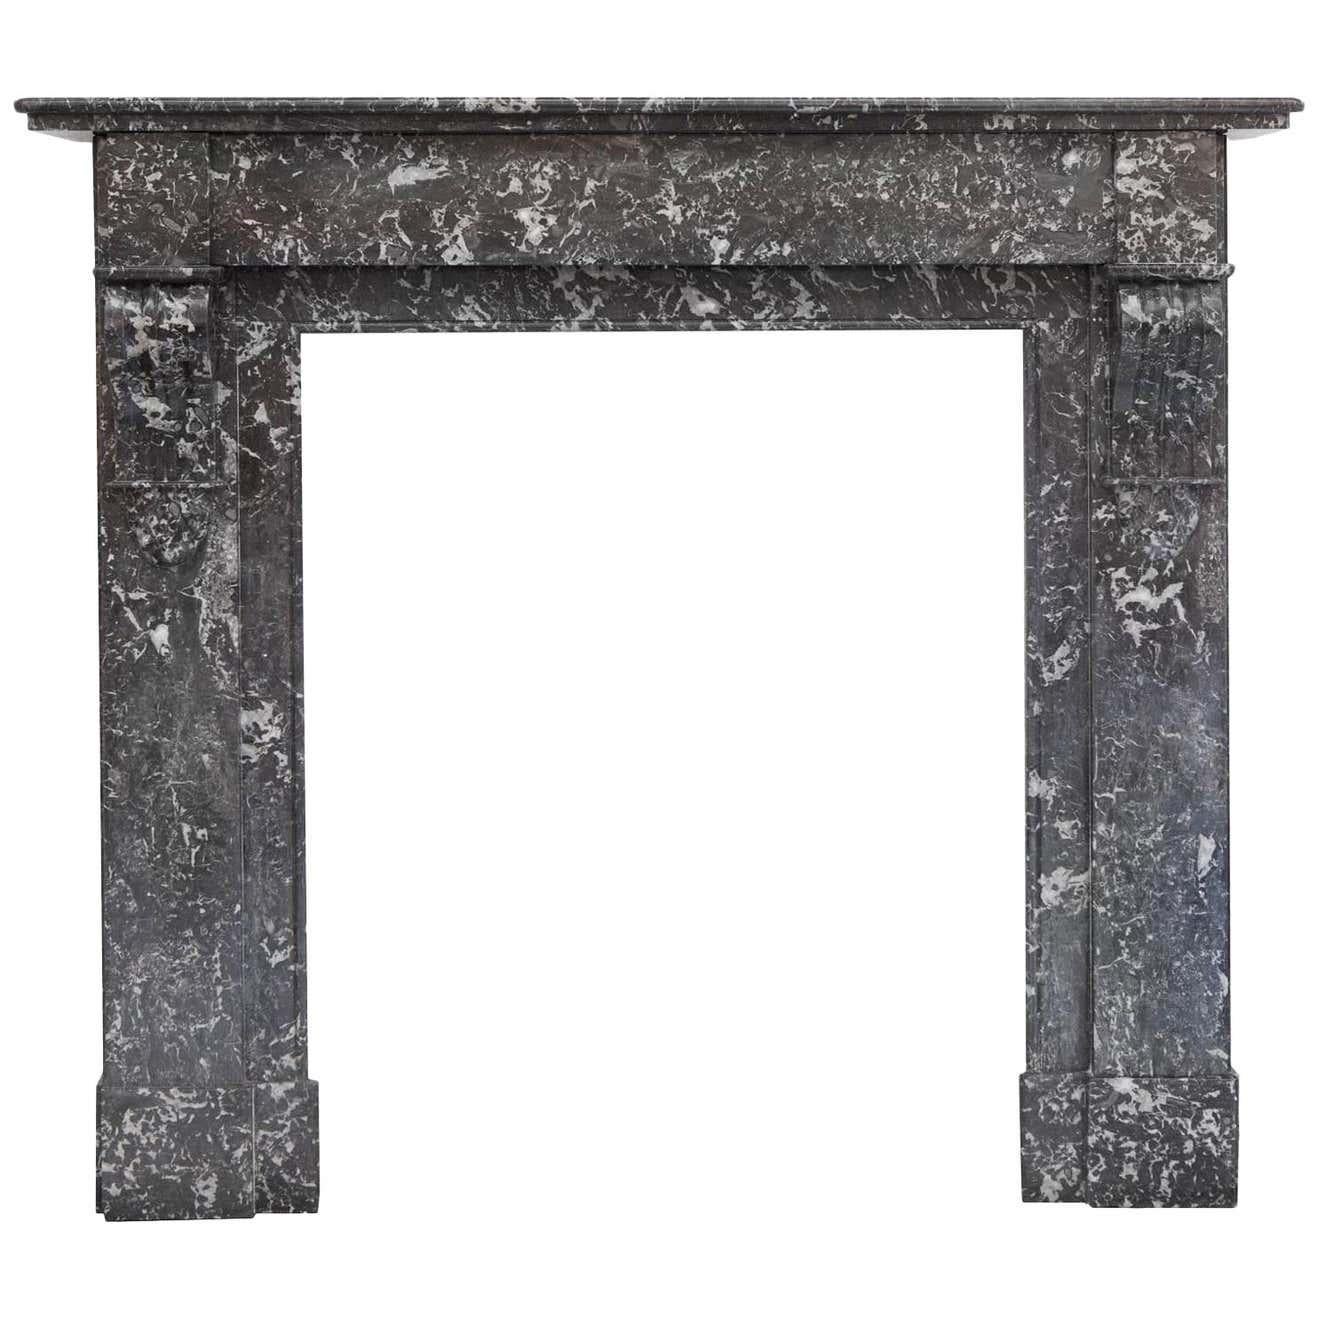 Unique rare 19th century antique French Louis Phillipe fireplace mantel. Hand carved in desirable style Anne's marble. Simple jambs and Frieze with elegantly carved corbels. Full measurements: Shelf width: 56